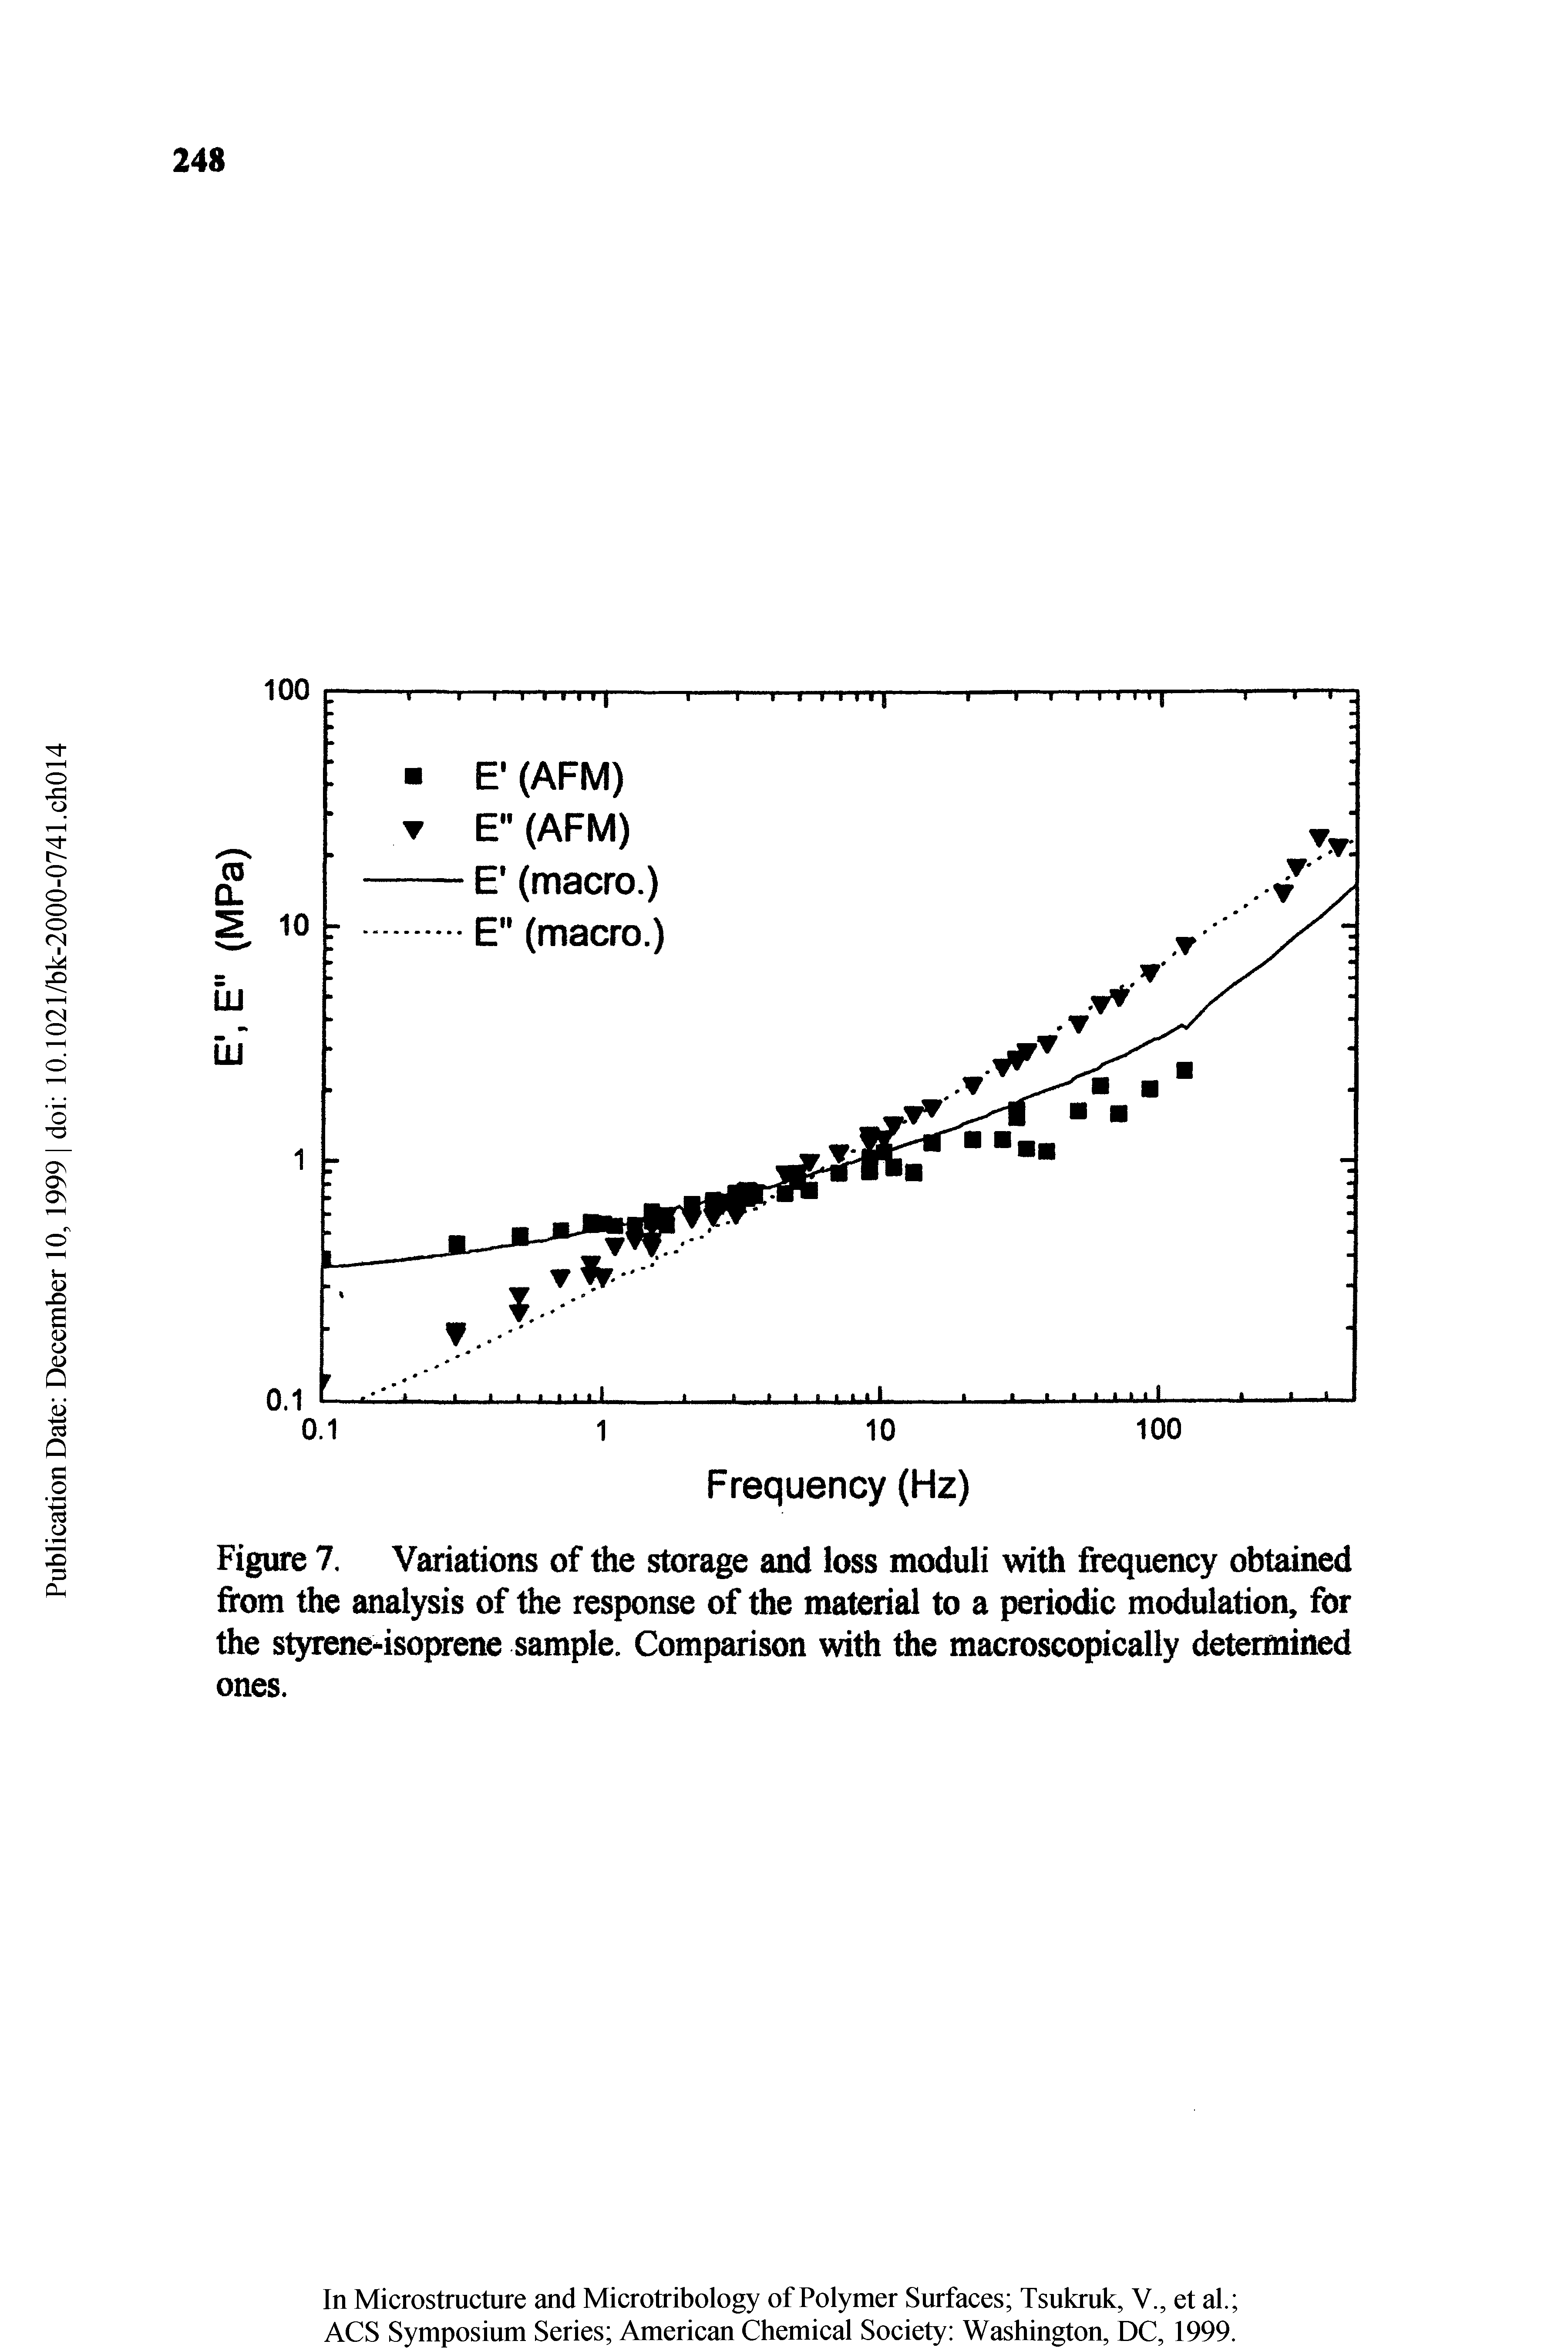 Figure 7. Variations of tiie storage and loss moduli with frequency obtained from the analysis of the response of the material to a periodic modulation, for the styrene isoprene sample. Comparison with the macroscopically determined ones.